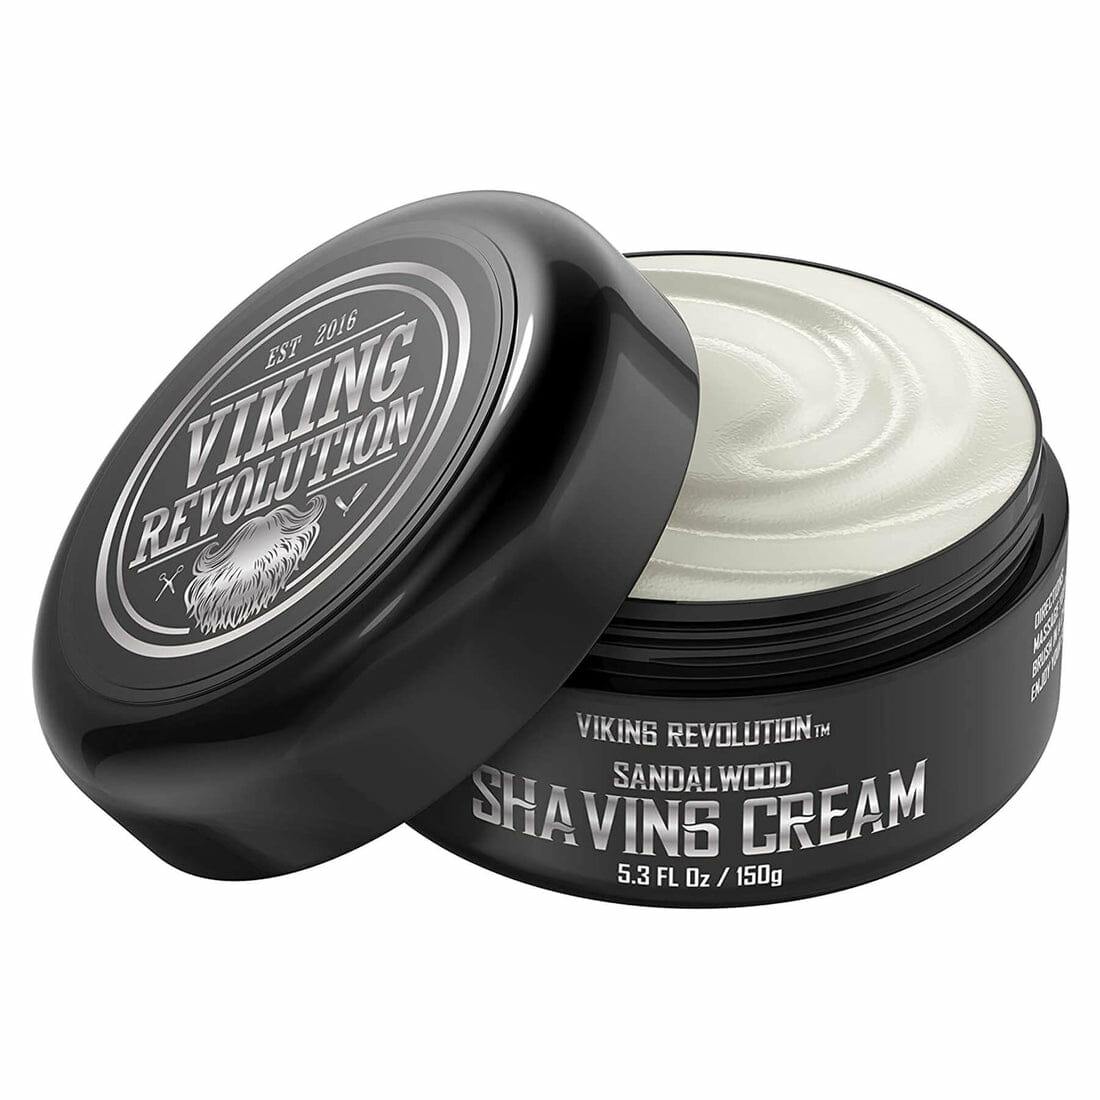 An open can of shaving cream by Vikinng